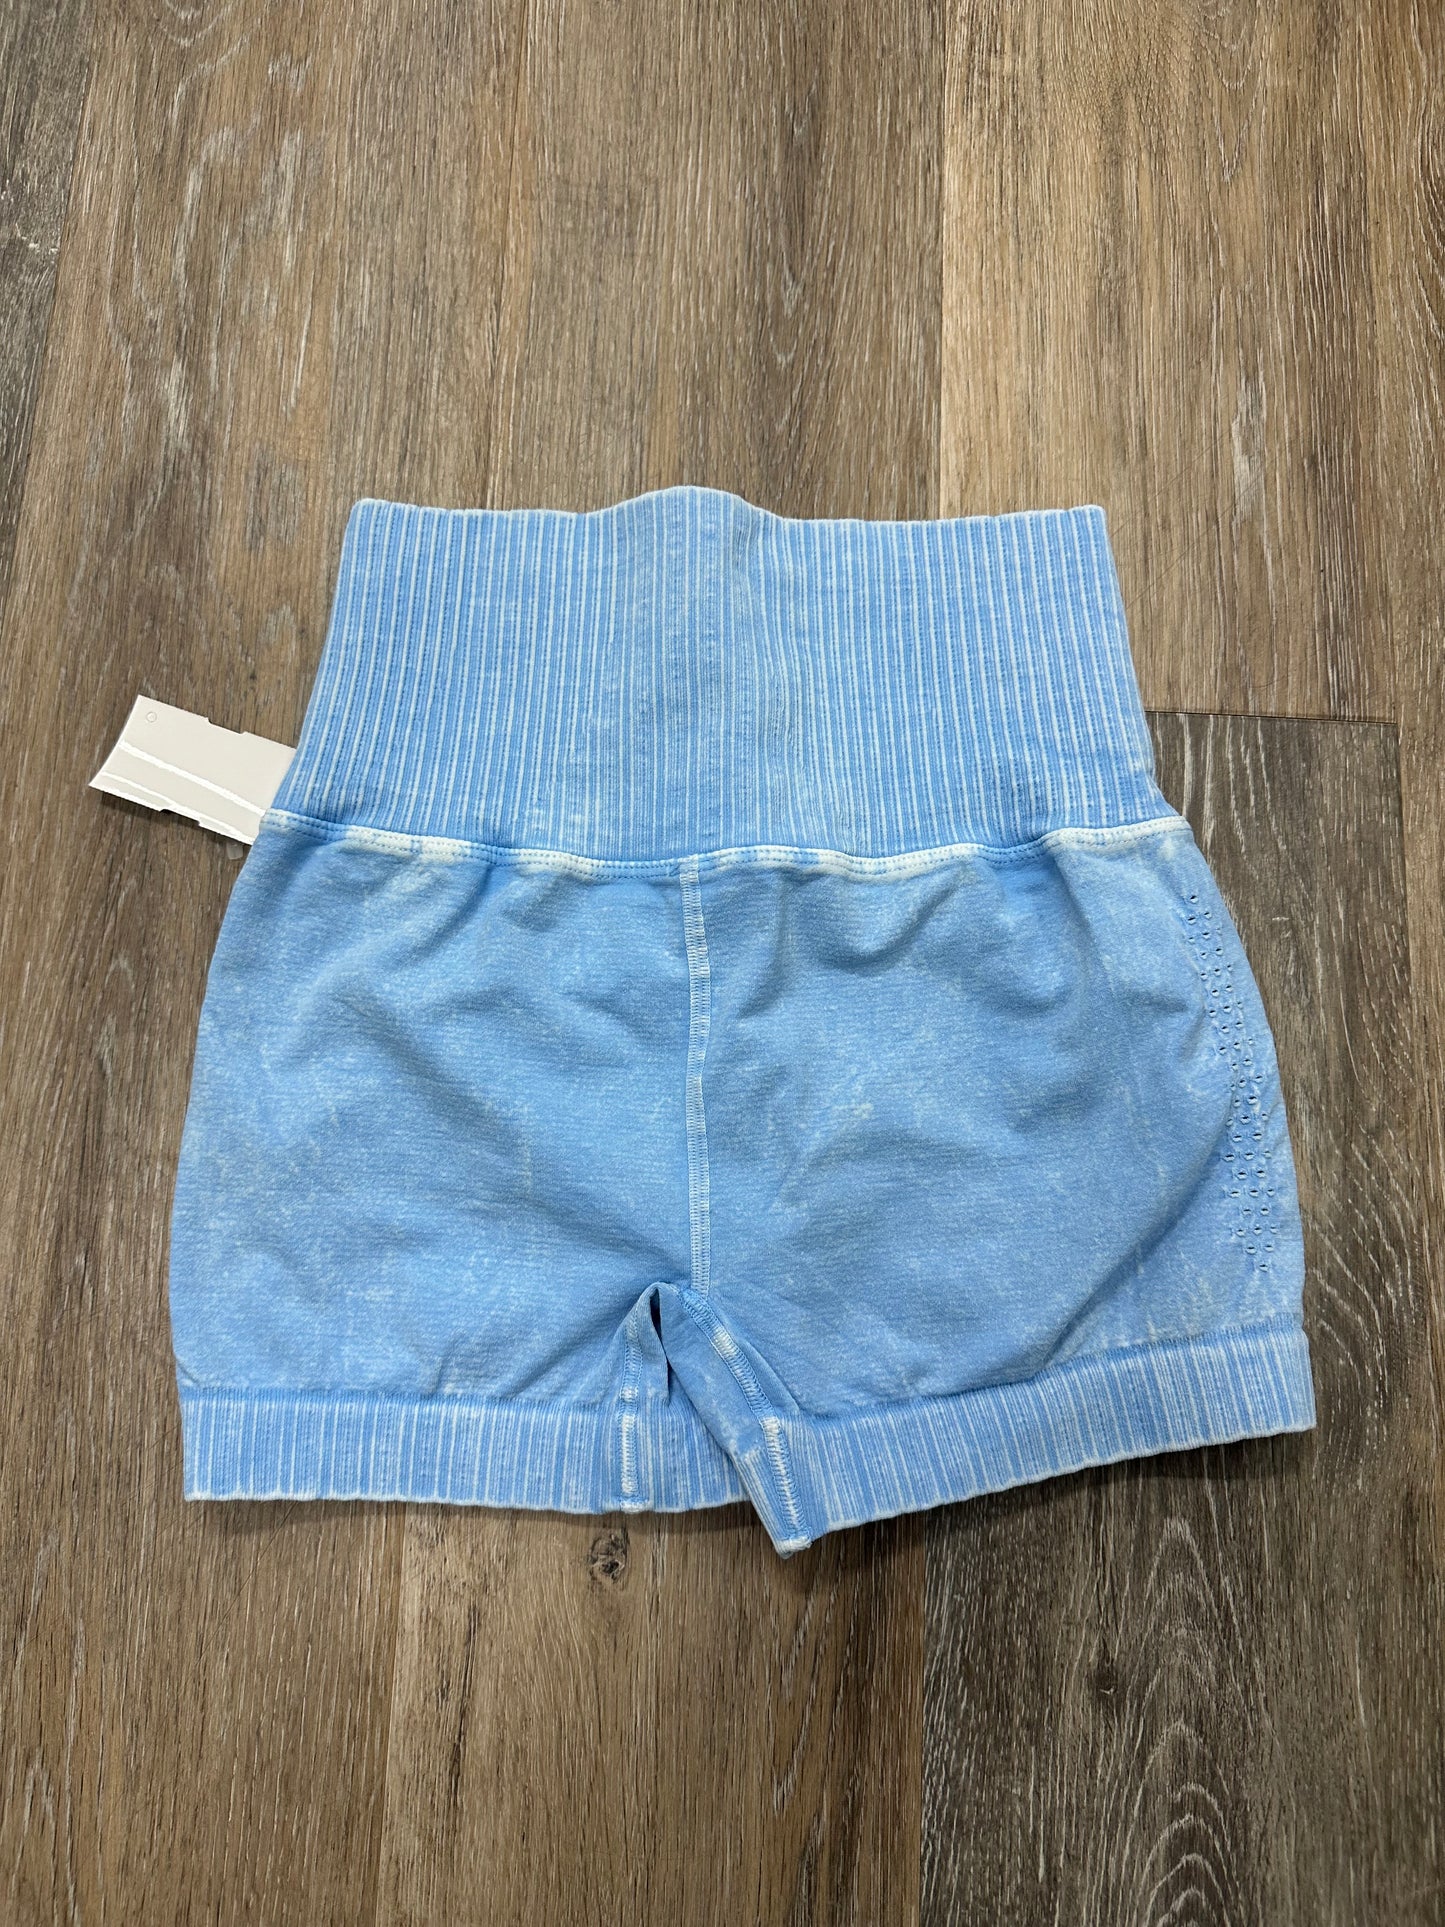 Athletic Shorts By Free People  Size: Xs/S